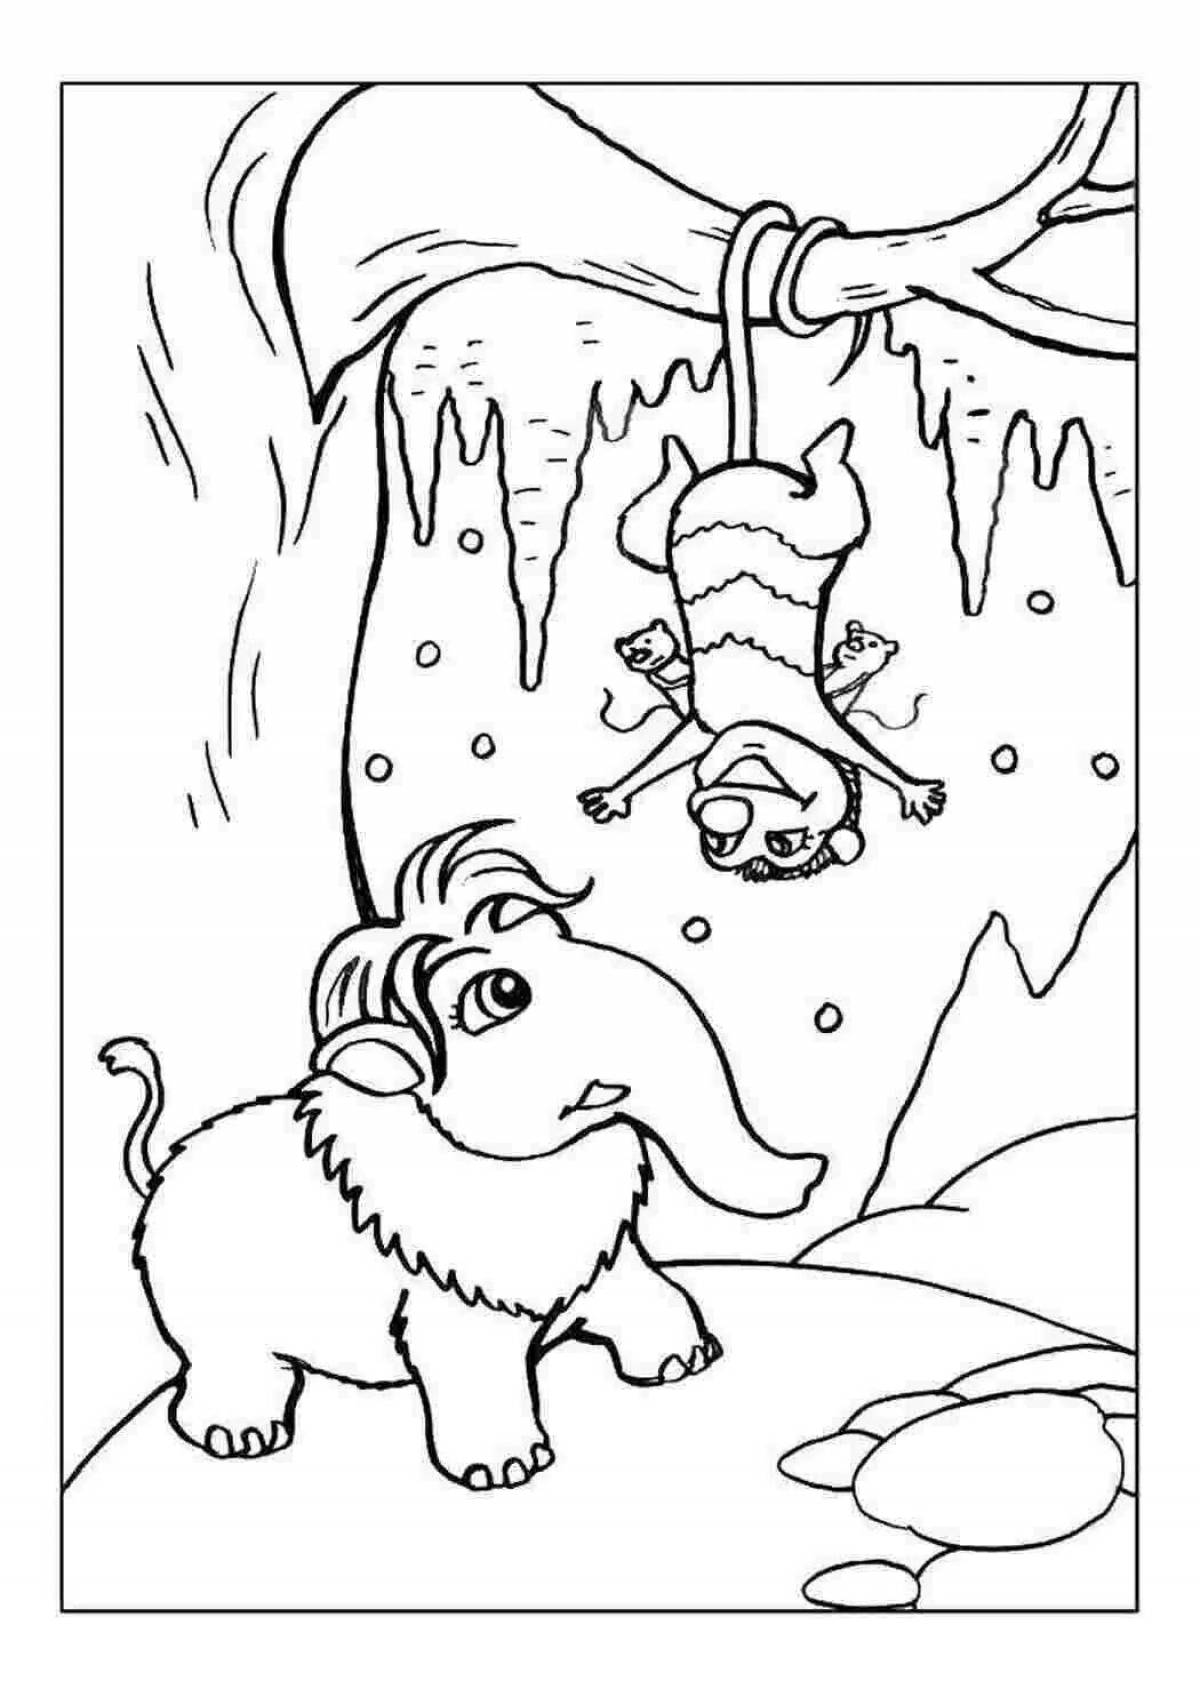 Amazing ice age coloring book for kids